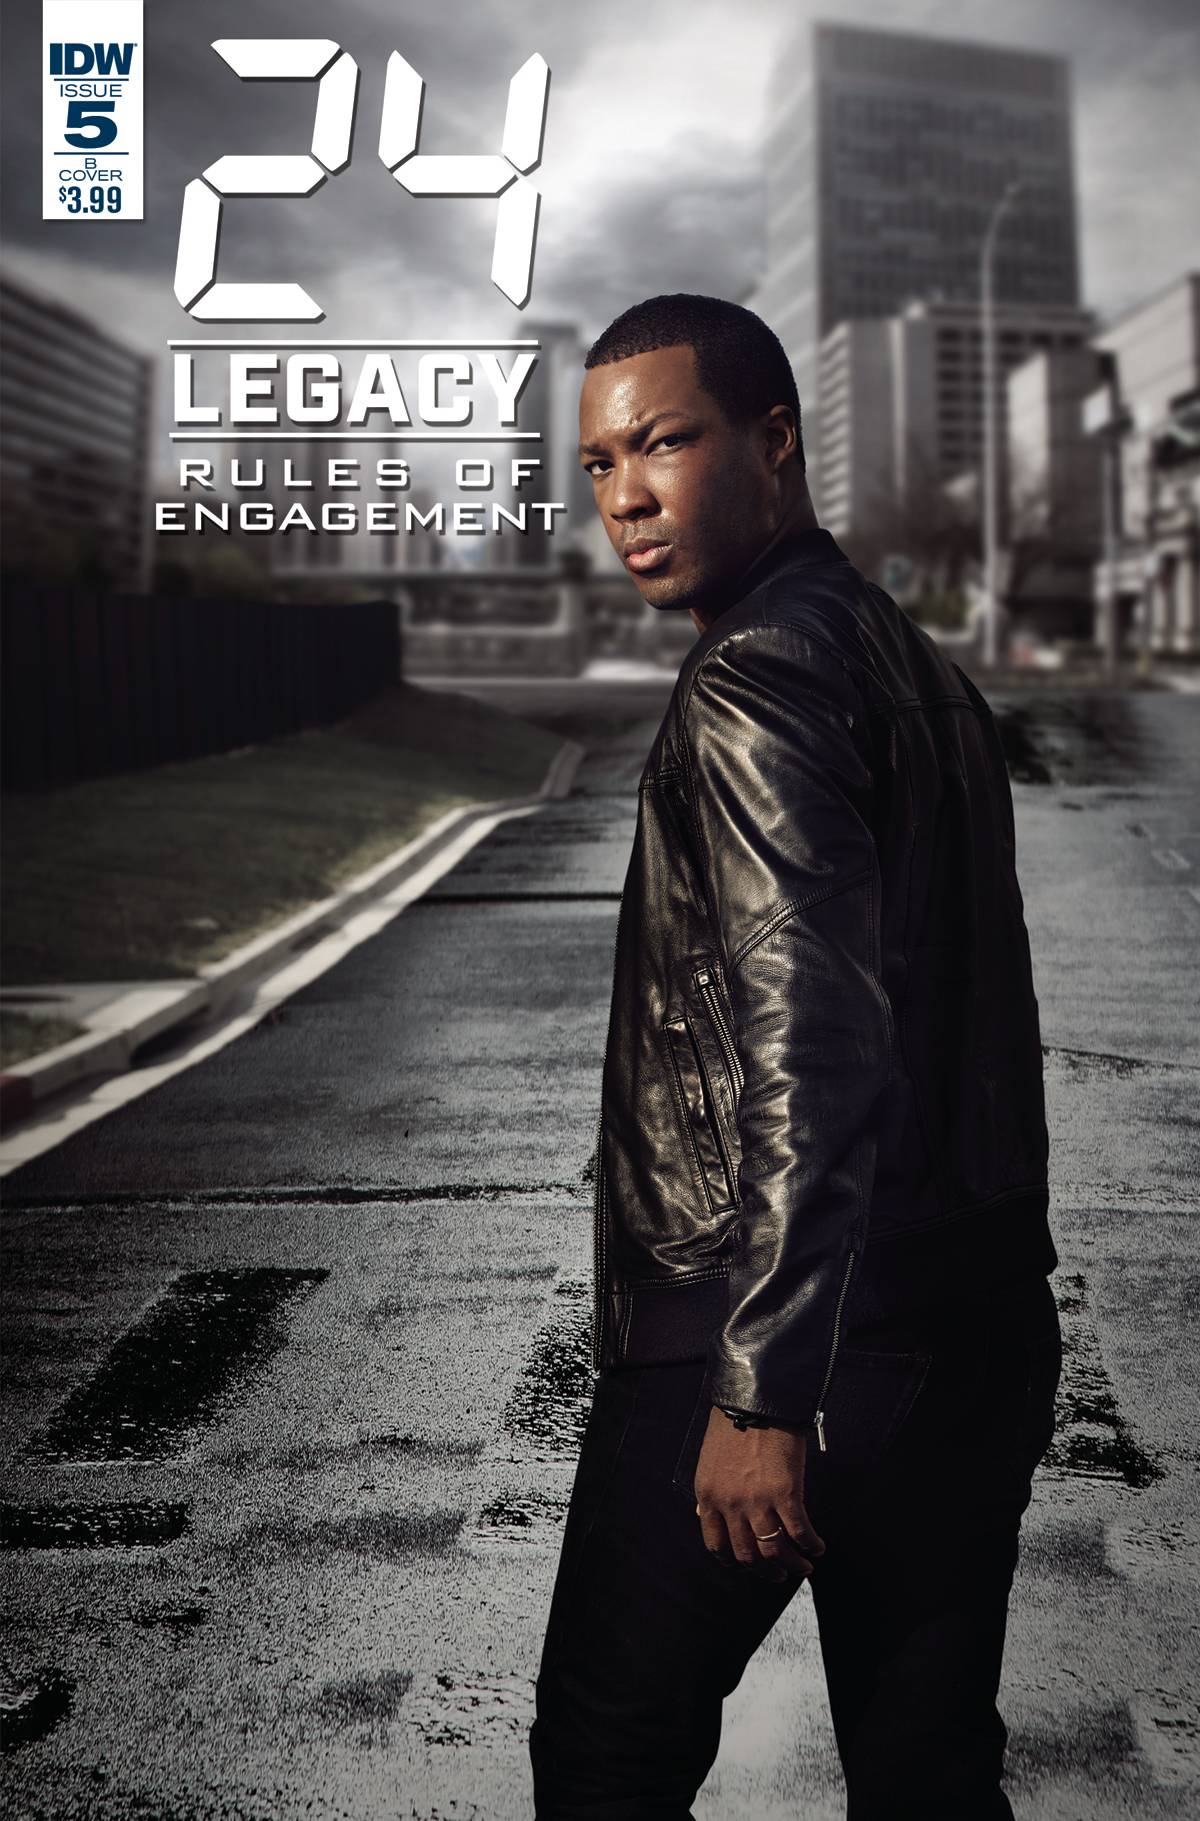 24: LEGACY--RULES OF ENGAGEMENT#5